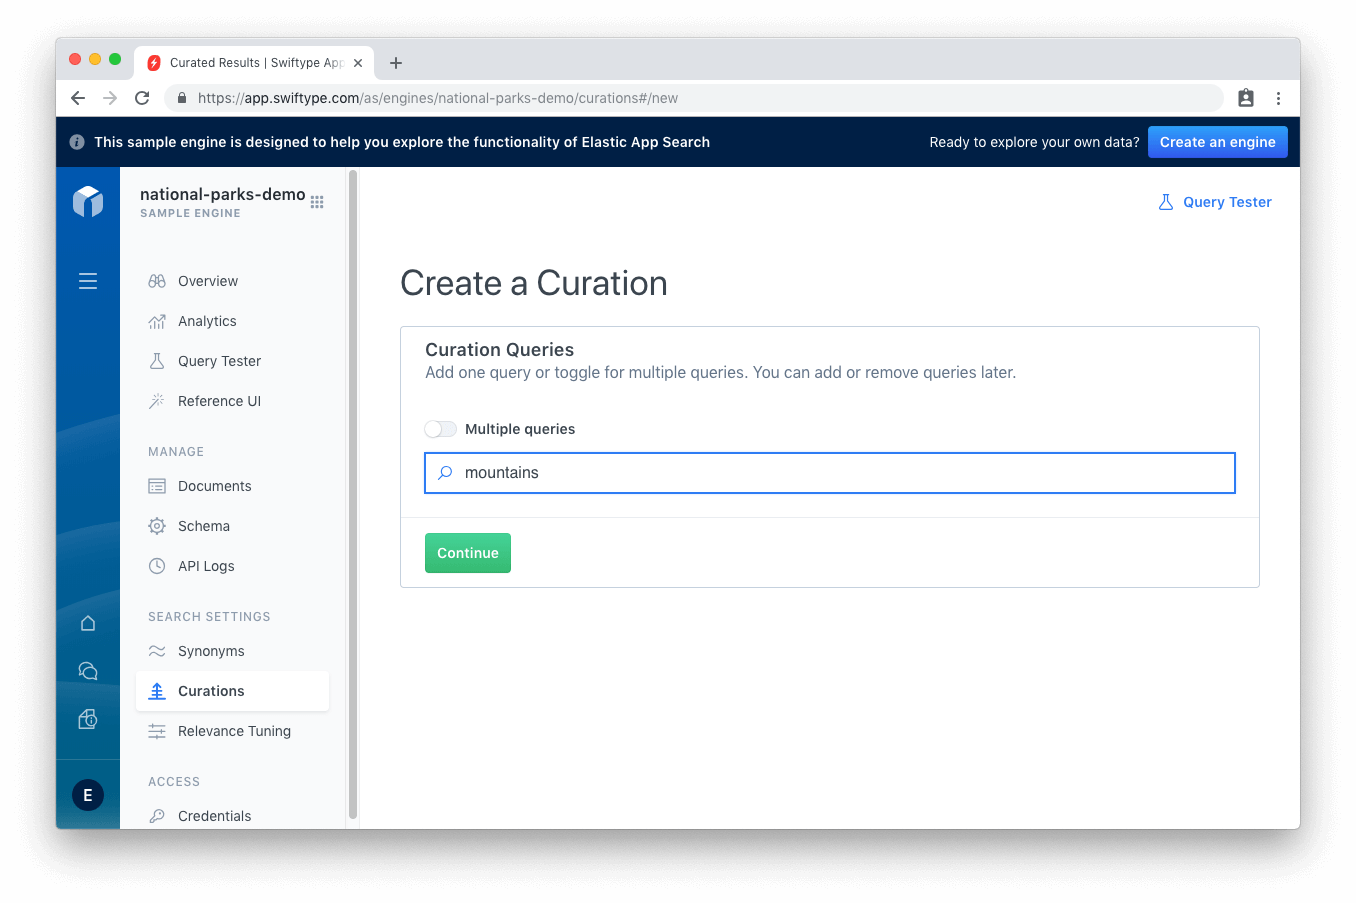 A textbox, wherein you can enter a query to curate. There is a multi query slider, if you want to curate multiple queries.